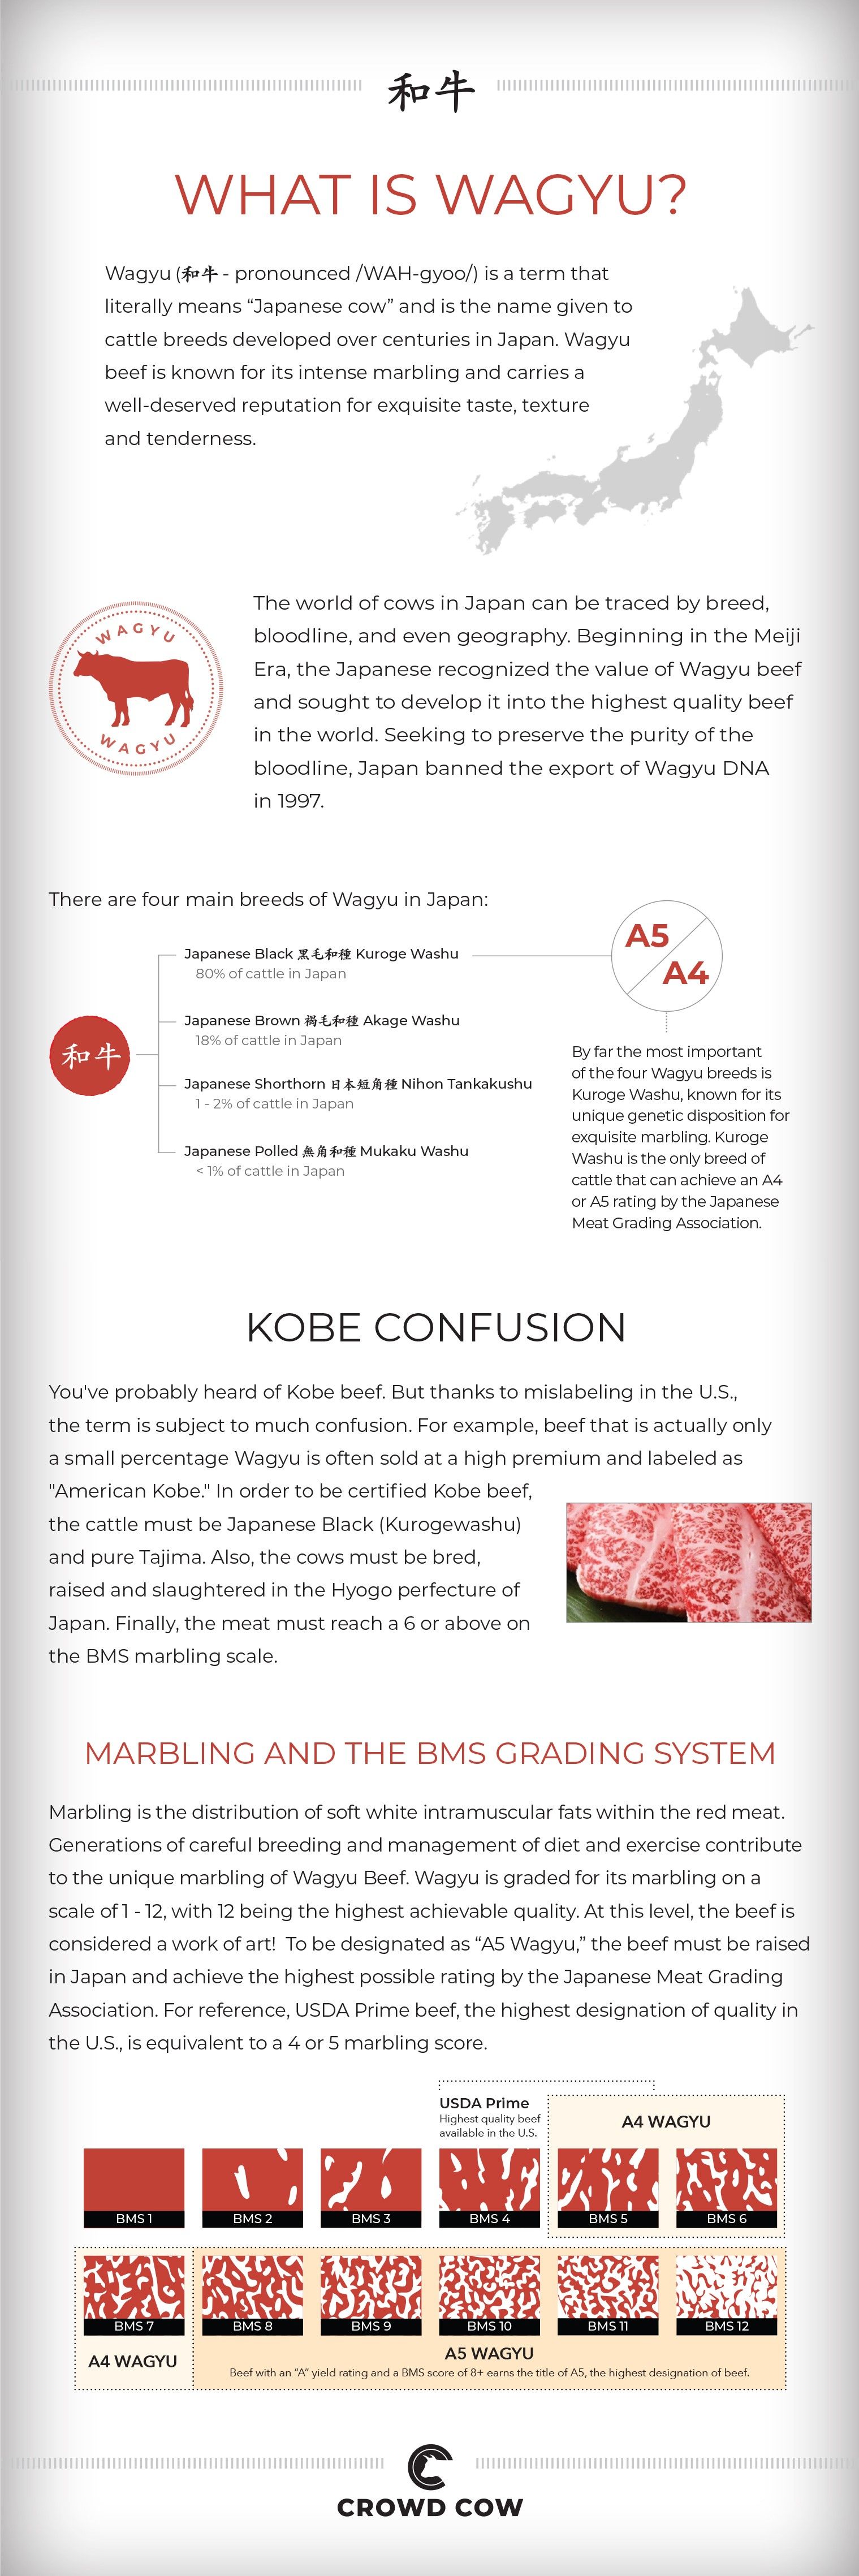 Updated-Wagyu-Infographic-6.12.20-cropped